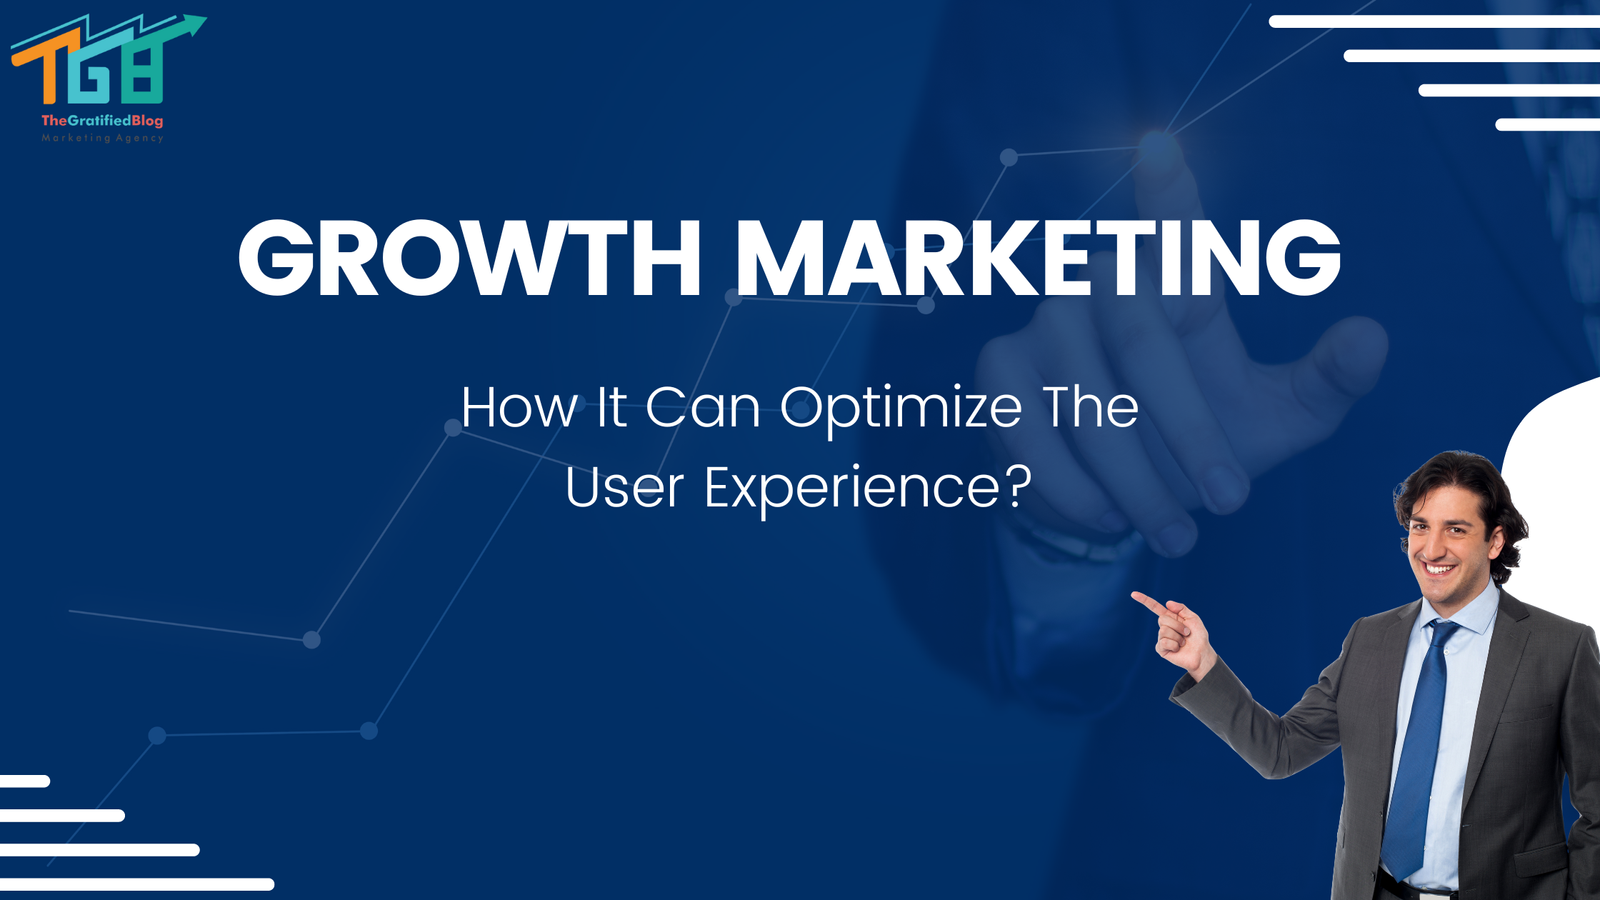 Growth Marketing How It Can Optimize The User Experience